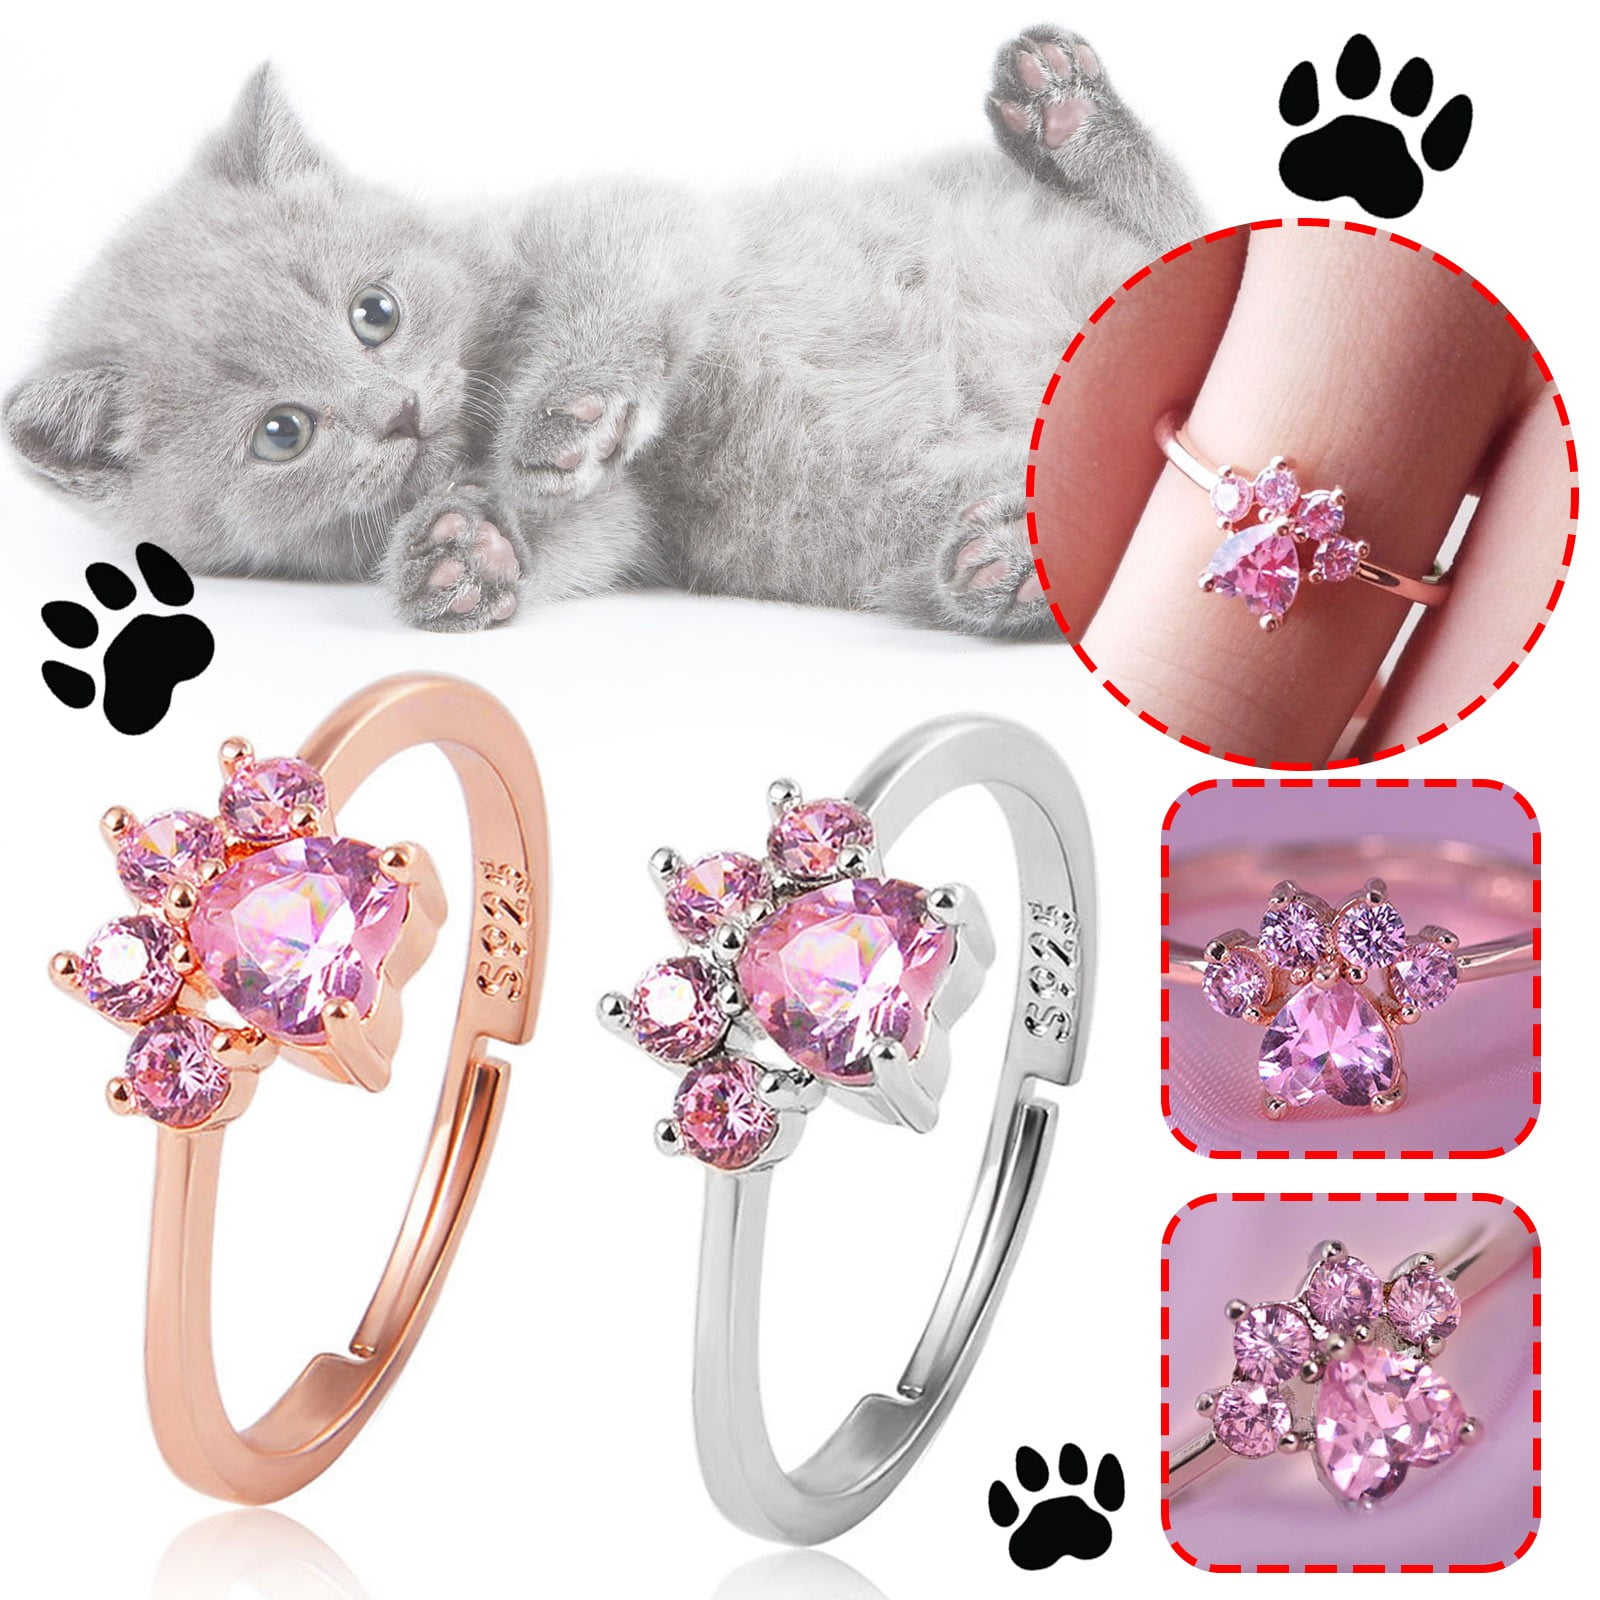 LAMOON Sterling Silver 925 Jewelry Rings For Women Pink Paw Rose Quartz Ring  Rose Gold / White Gold Platd Gemstones Jewellery